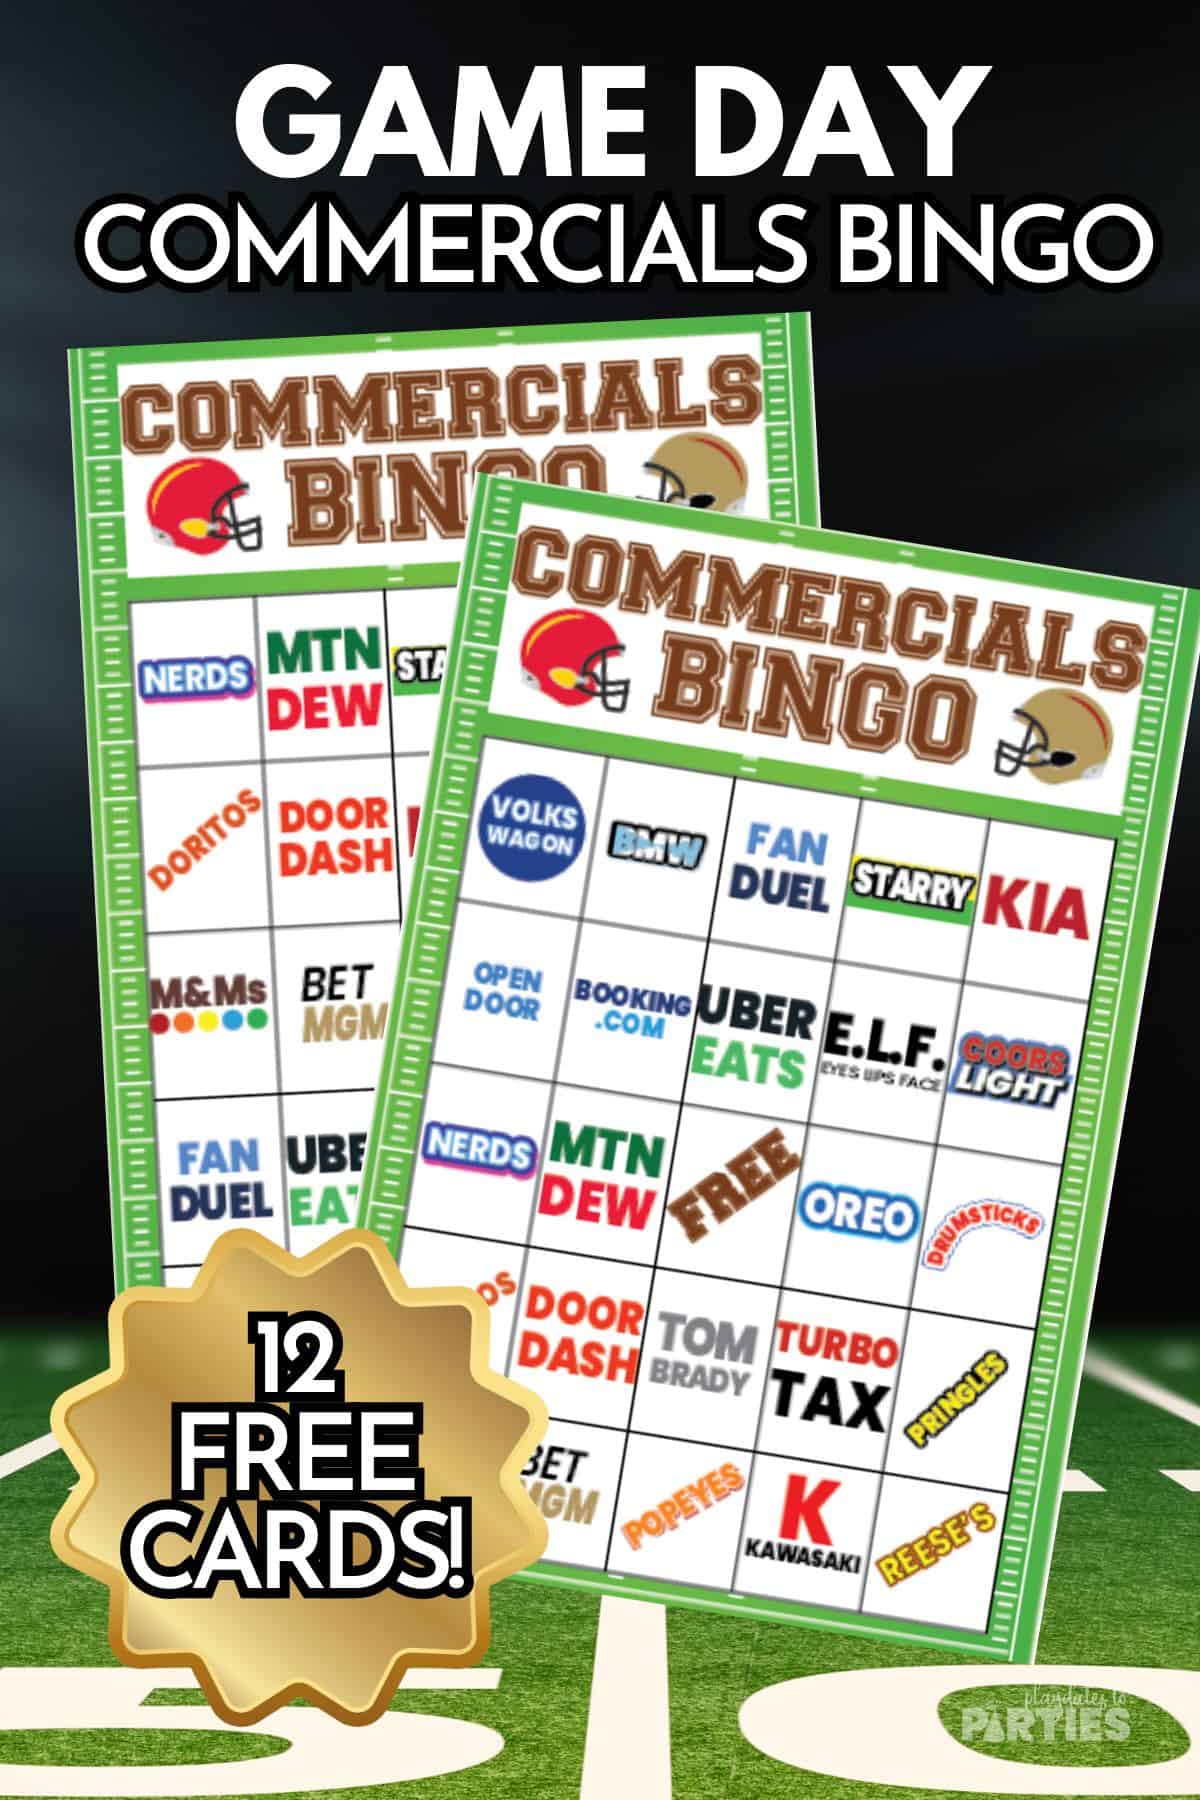 Game Day Commercials Bingo 12 Free Cards.